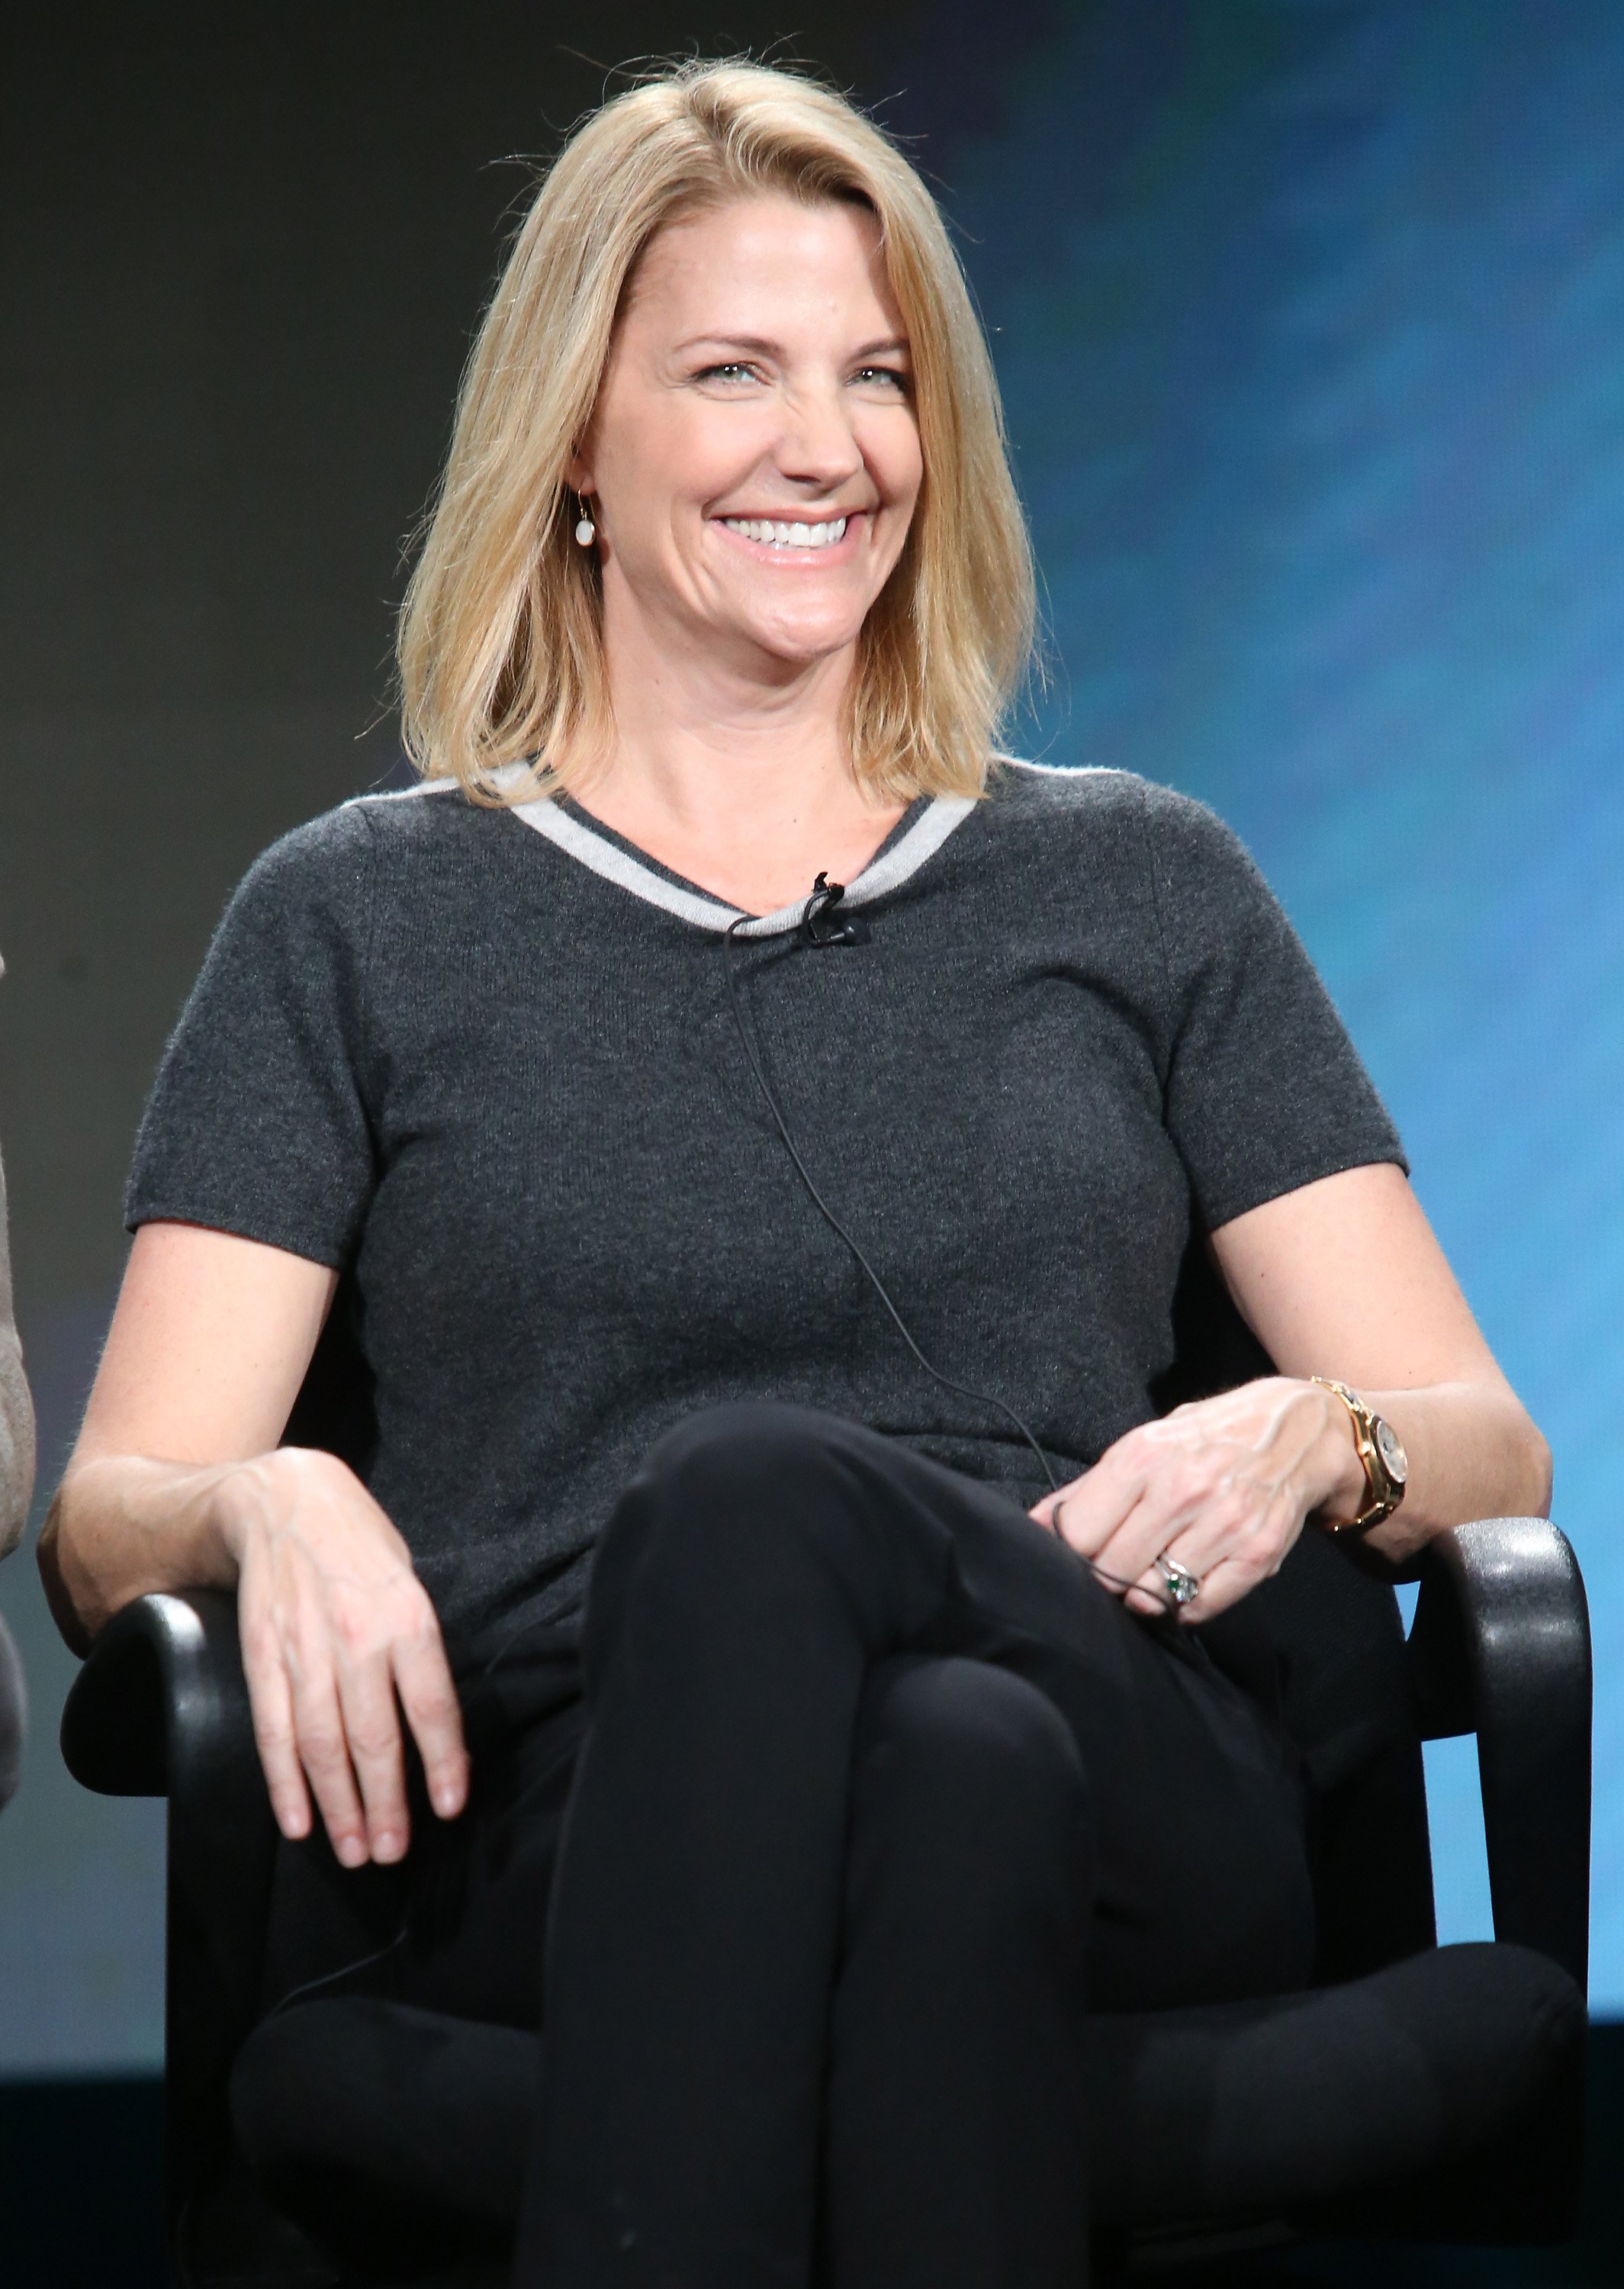 Nancy Carell during TBS's Angie Tribeca panel as part of the Turner Networks portion of This is Cable Television Critics Association Winter Tour at Langham Hotel on January 7, 2016 in Pasadena, California. | Photo: GettyImages